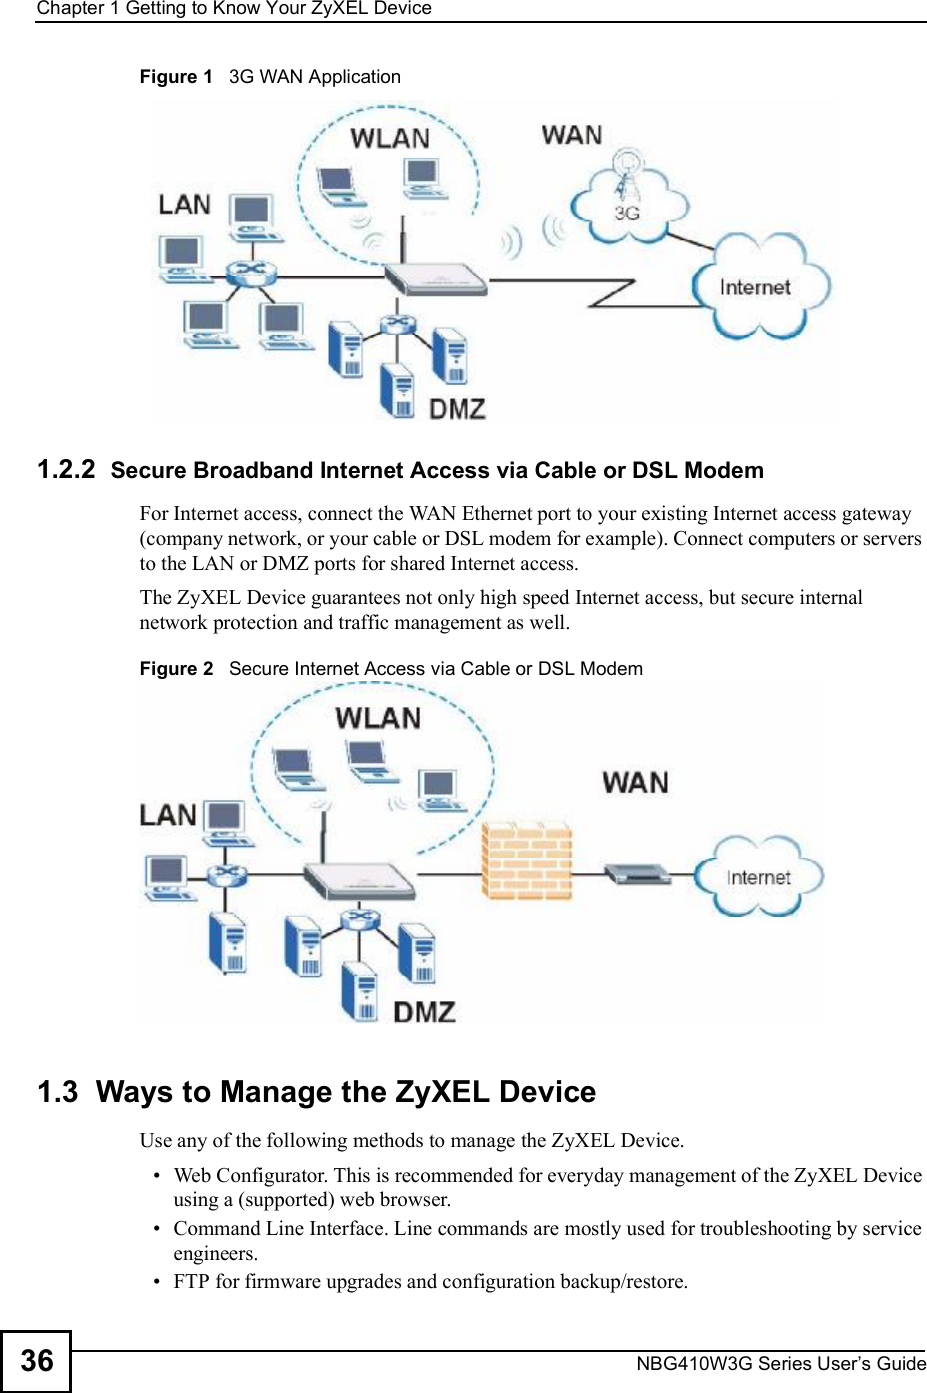 Chapter 1Getting to Know Your ZyXEL DeviceNBG410W3G Series User s Guide36Figure 1   3G WAN Application1.2.2  Secure Broadband Internet Access via Cable or DSL Modem For Internet access, connect the WAN Ethernet port to your existing Internet access gateway (company network, or your cable or DSL modem for example). Connect computers or servers to the LAN or DMZ ports for shared Internet access. The ZyXEL Device guarantees not only high speed Internet access, but secure internal network protection and traffic management as well.Figure 2   Secure Internet Access via Cable or DSL Modem1.3  Ways to Manage the ZyXEL DeviceUse any of the following methods to manage the ZyXEL Device. Web Configurator. This is recommended for everyday management of the ZyXEL Device using a (supported) web browser. Command Line Interface. Line commands are mostly used for troubleshooting by service engineers. FTP for firmware upgrades and configuration backup/restore.